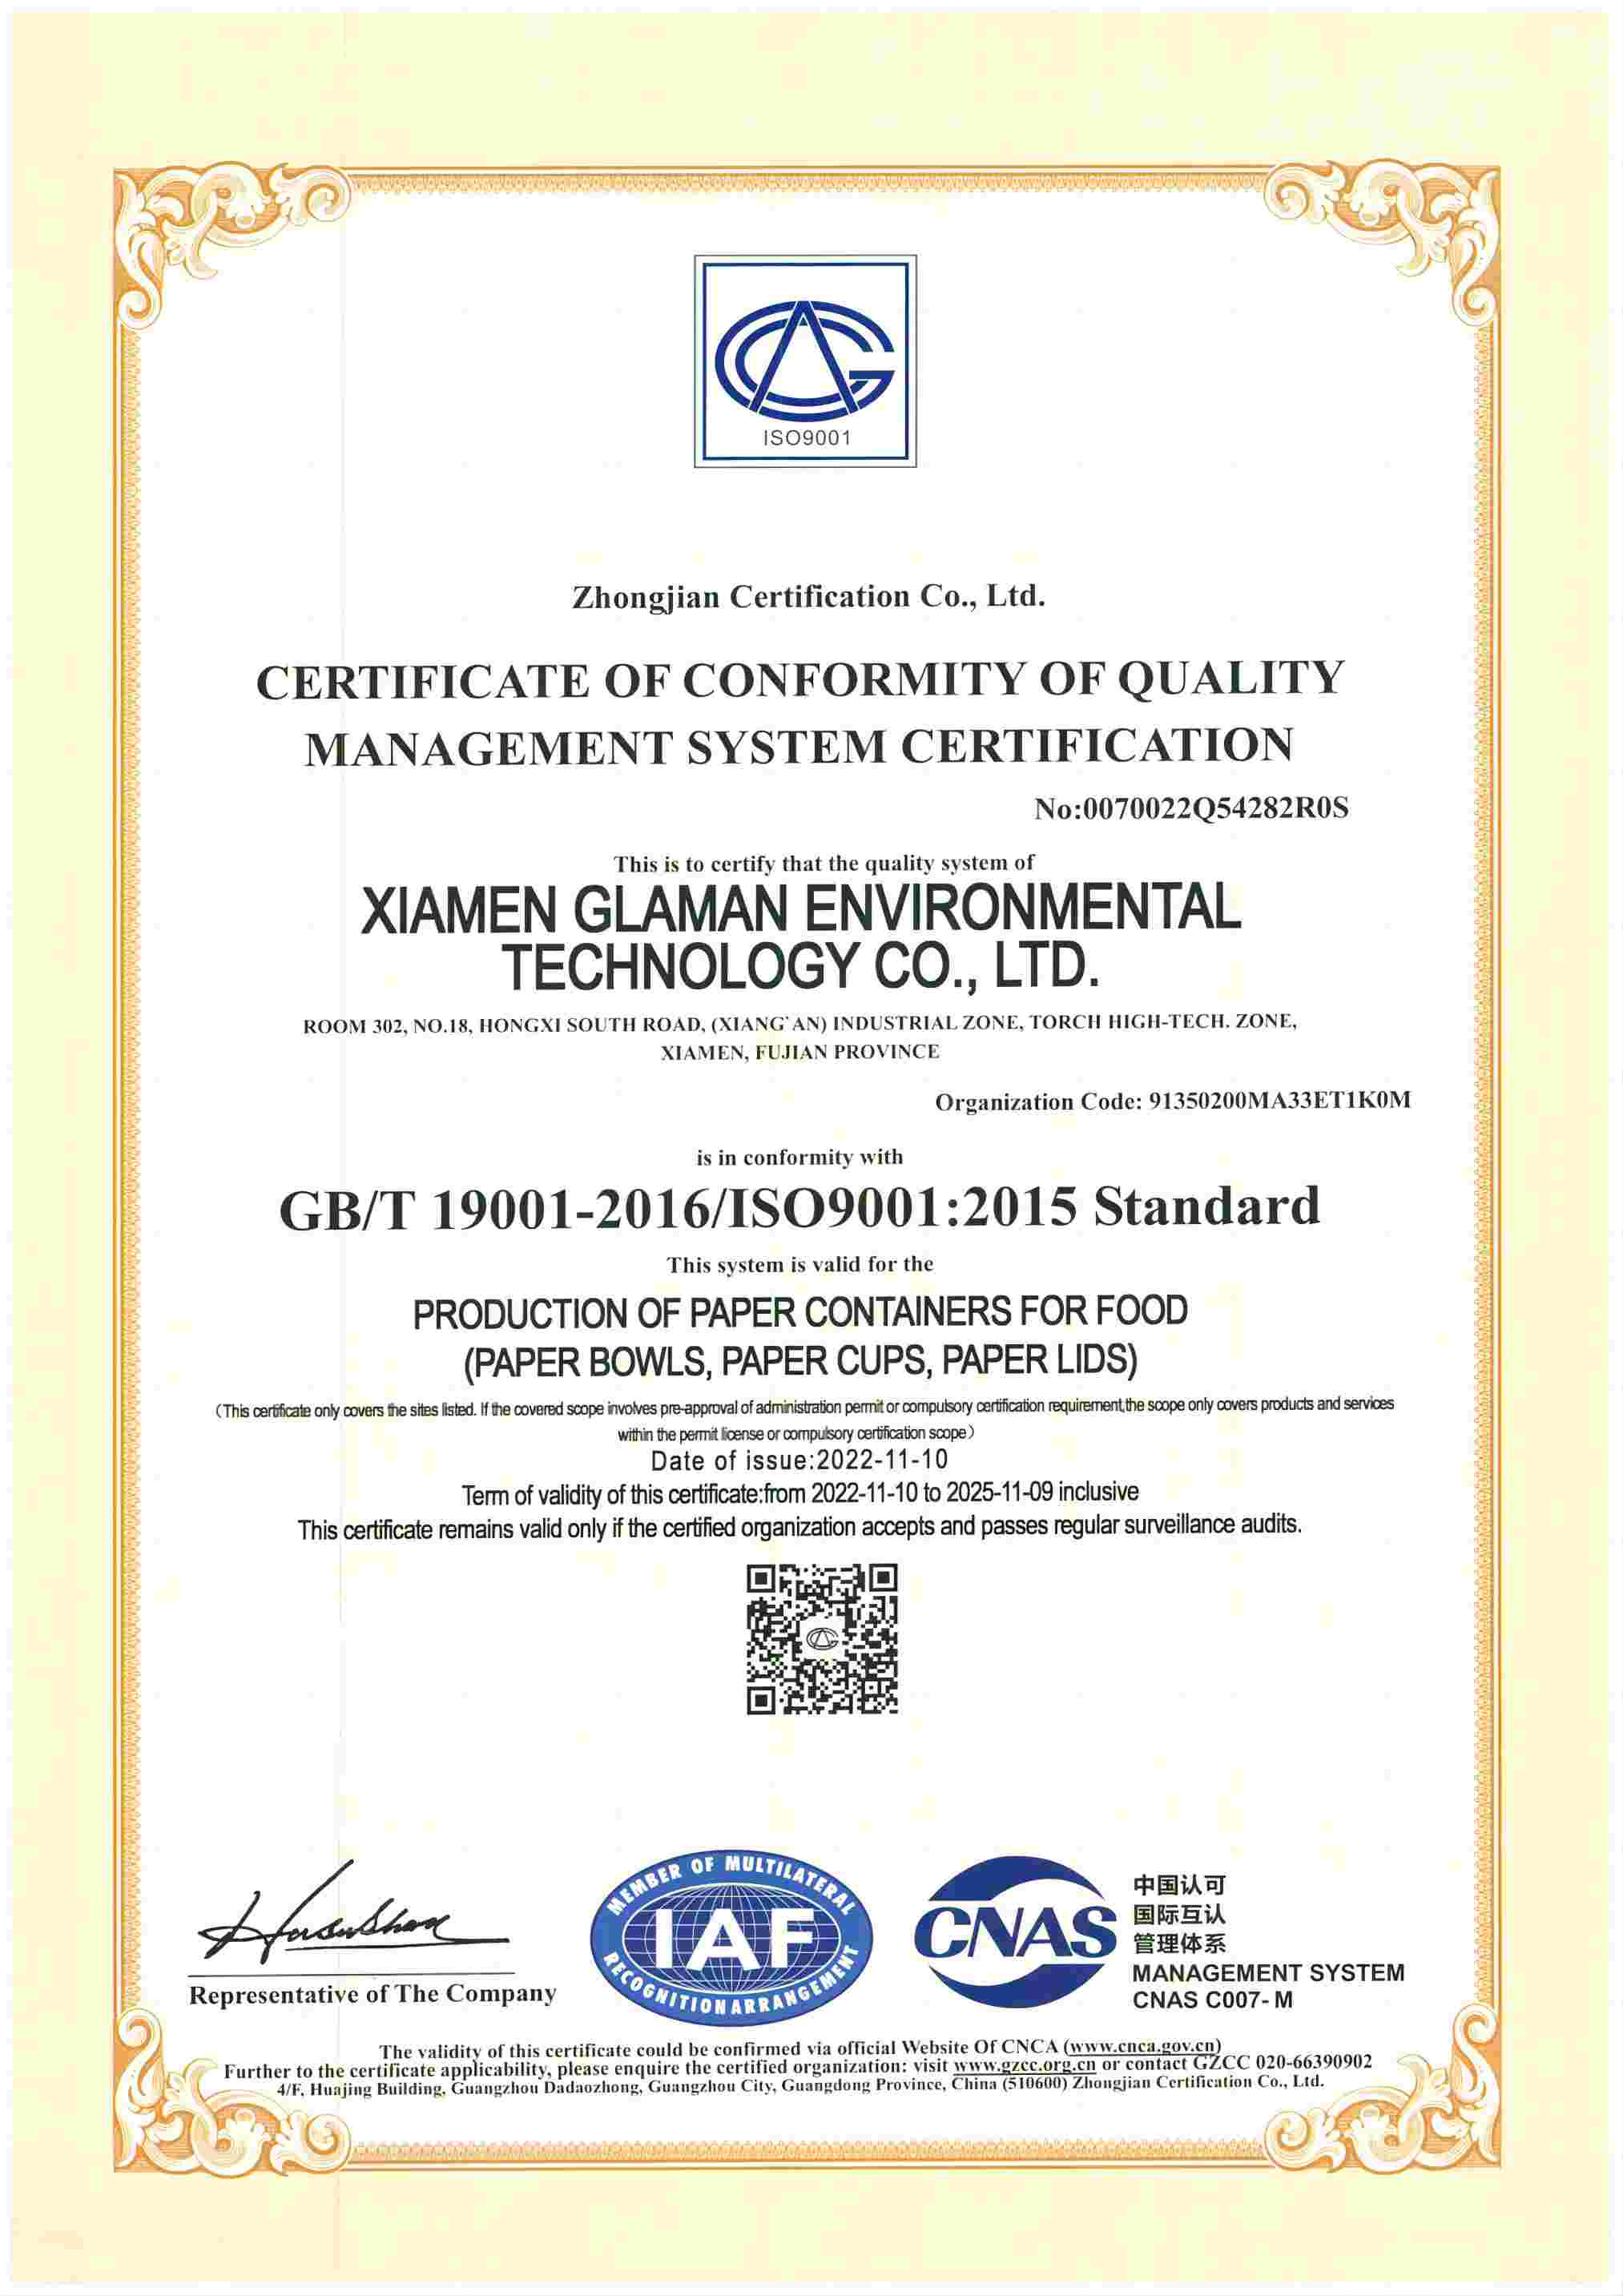 The certification of ISO9001